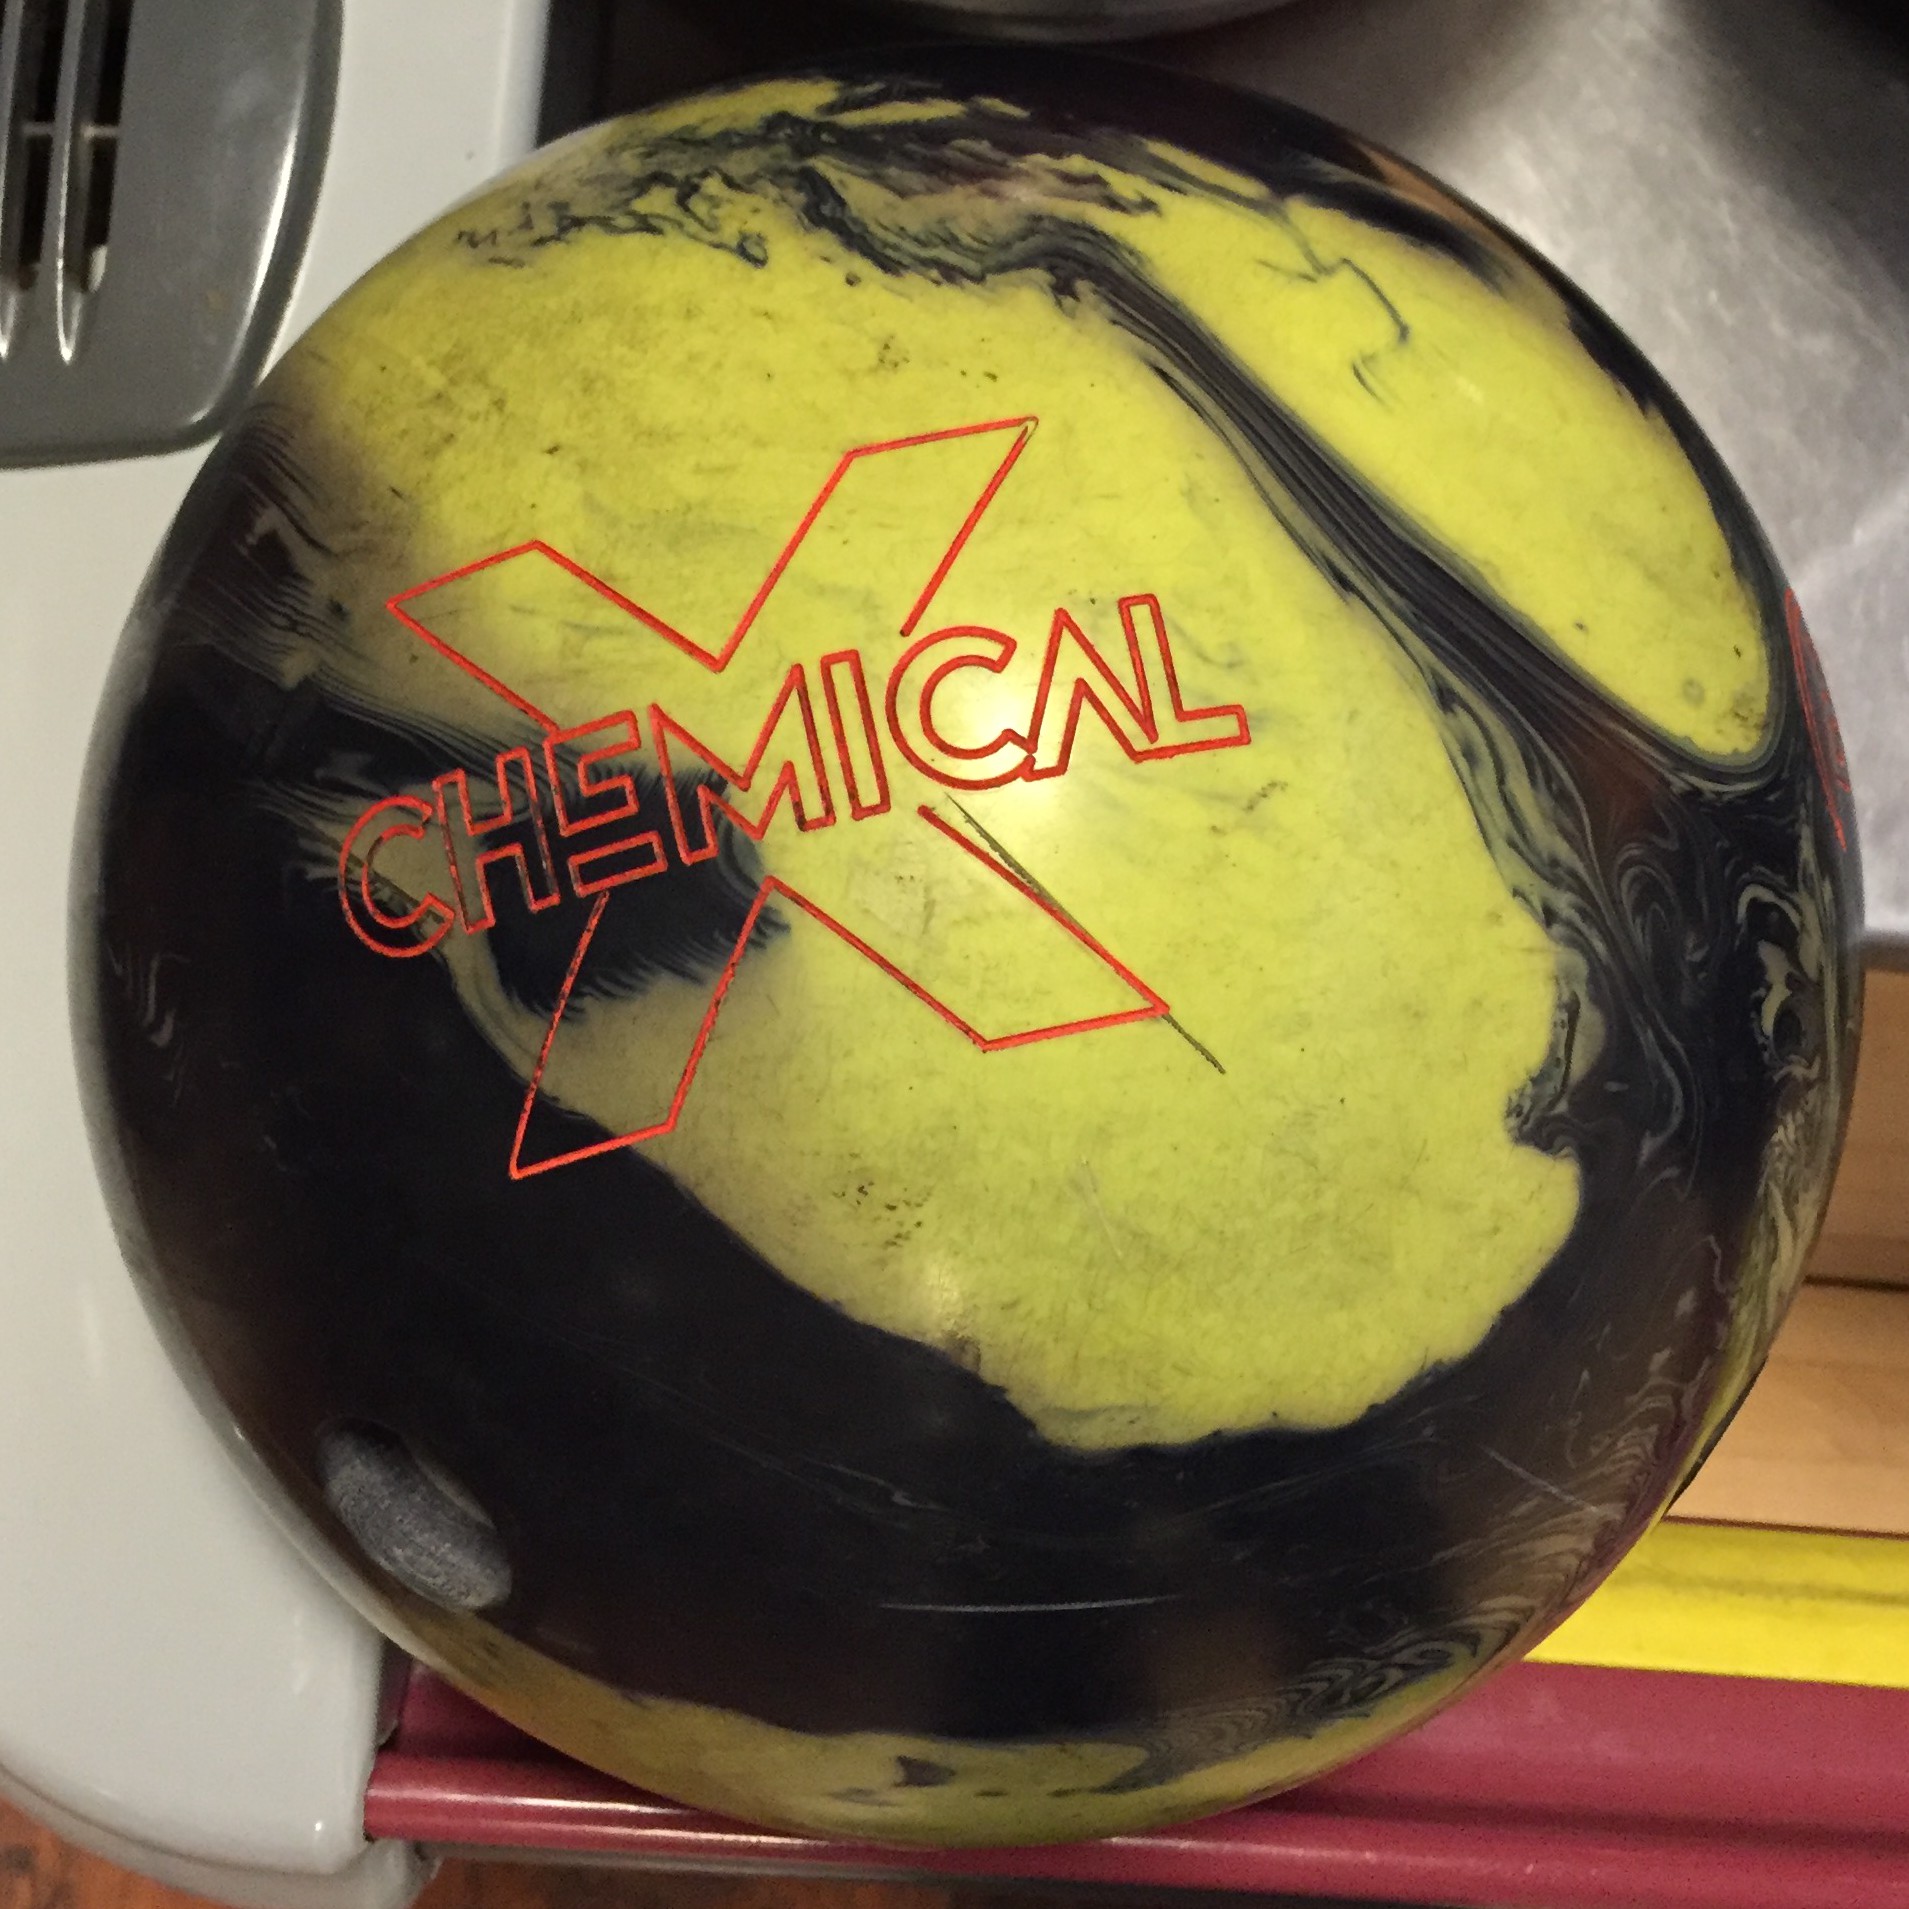 900 Global Chemical X Black Ops Respect And Respect Pearl Bowling Ball Review Tamer Bowling